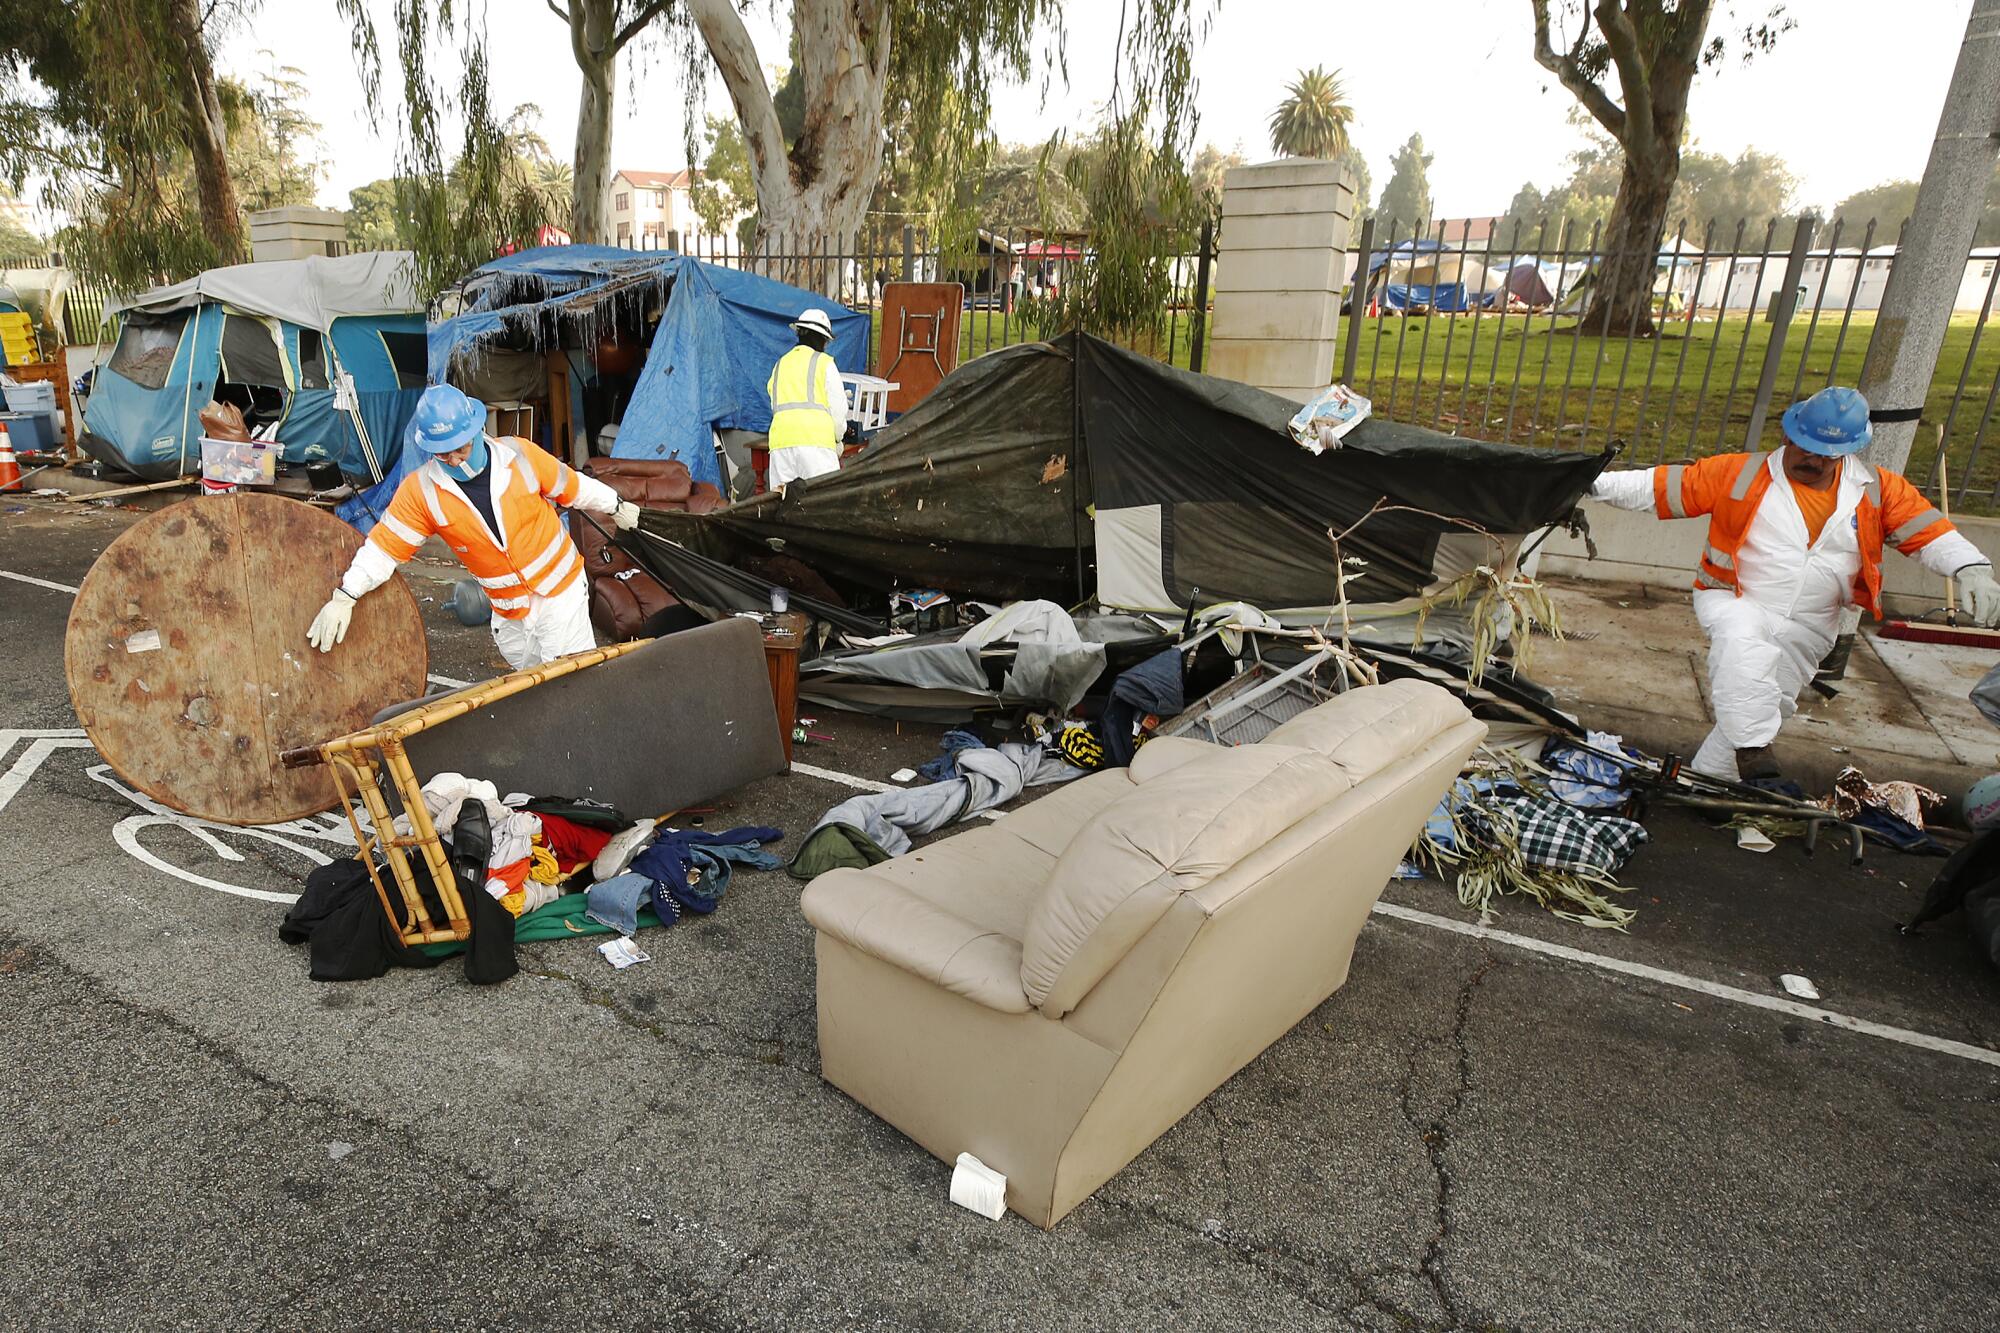 Members of the clean-up crew dismantle tents located on the Veterans Row homeless encampment.